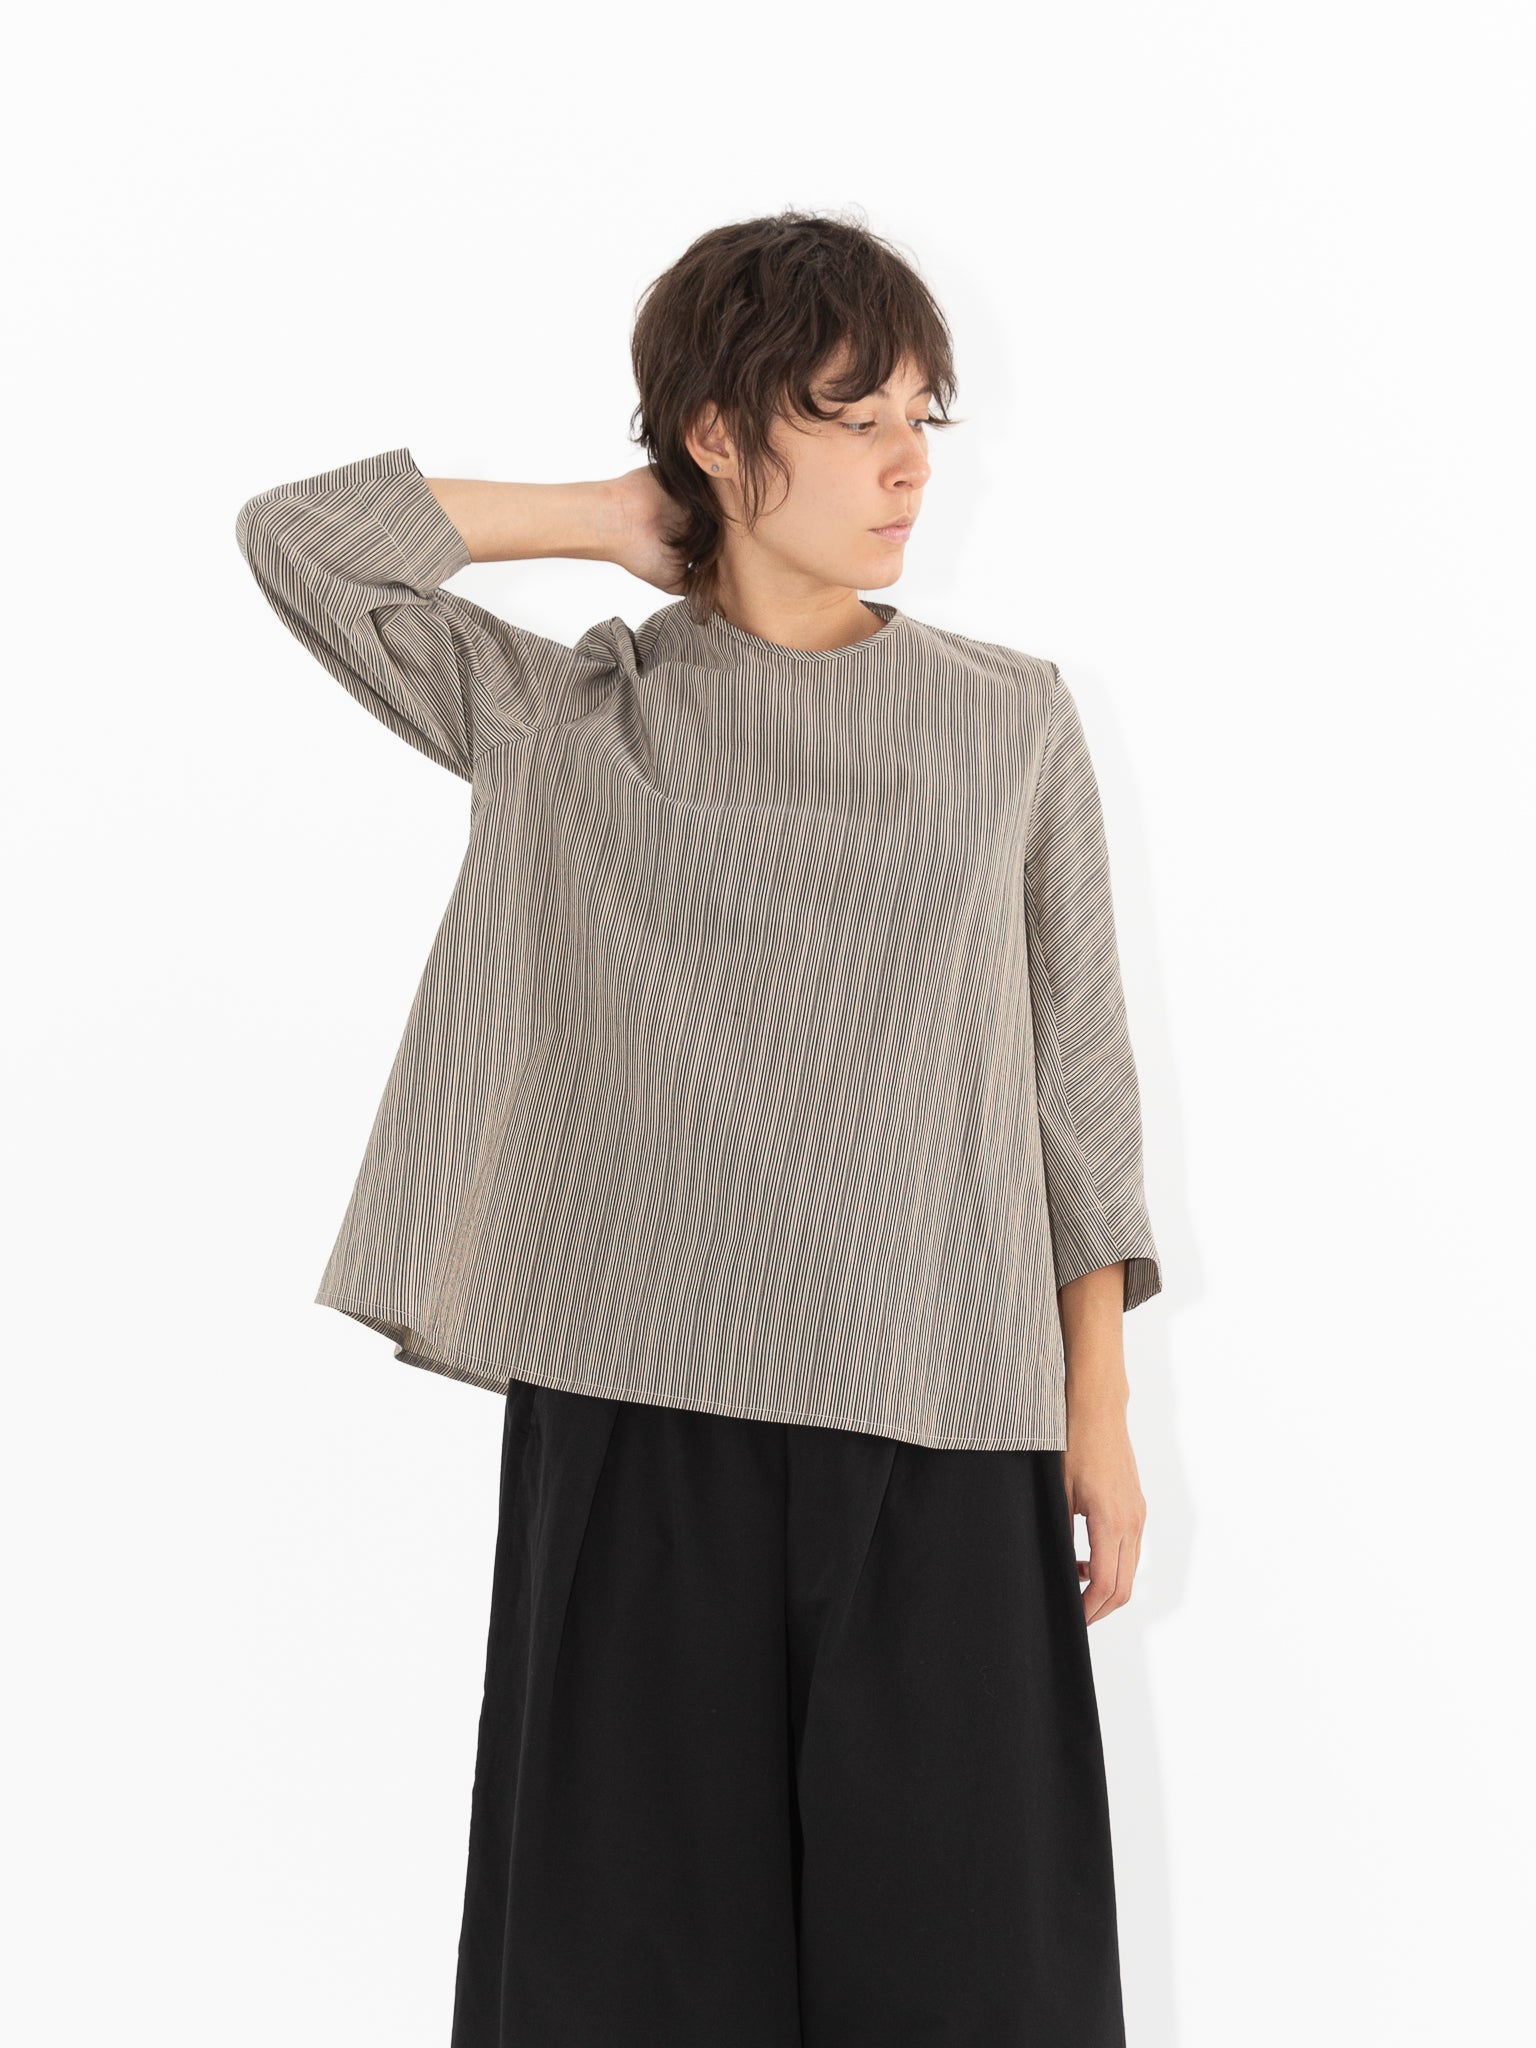 Toogood The Cutter Top, Fine Stripe - Worthwhile